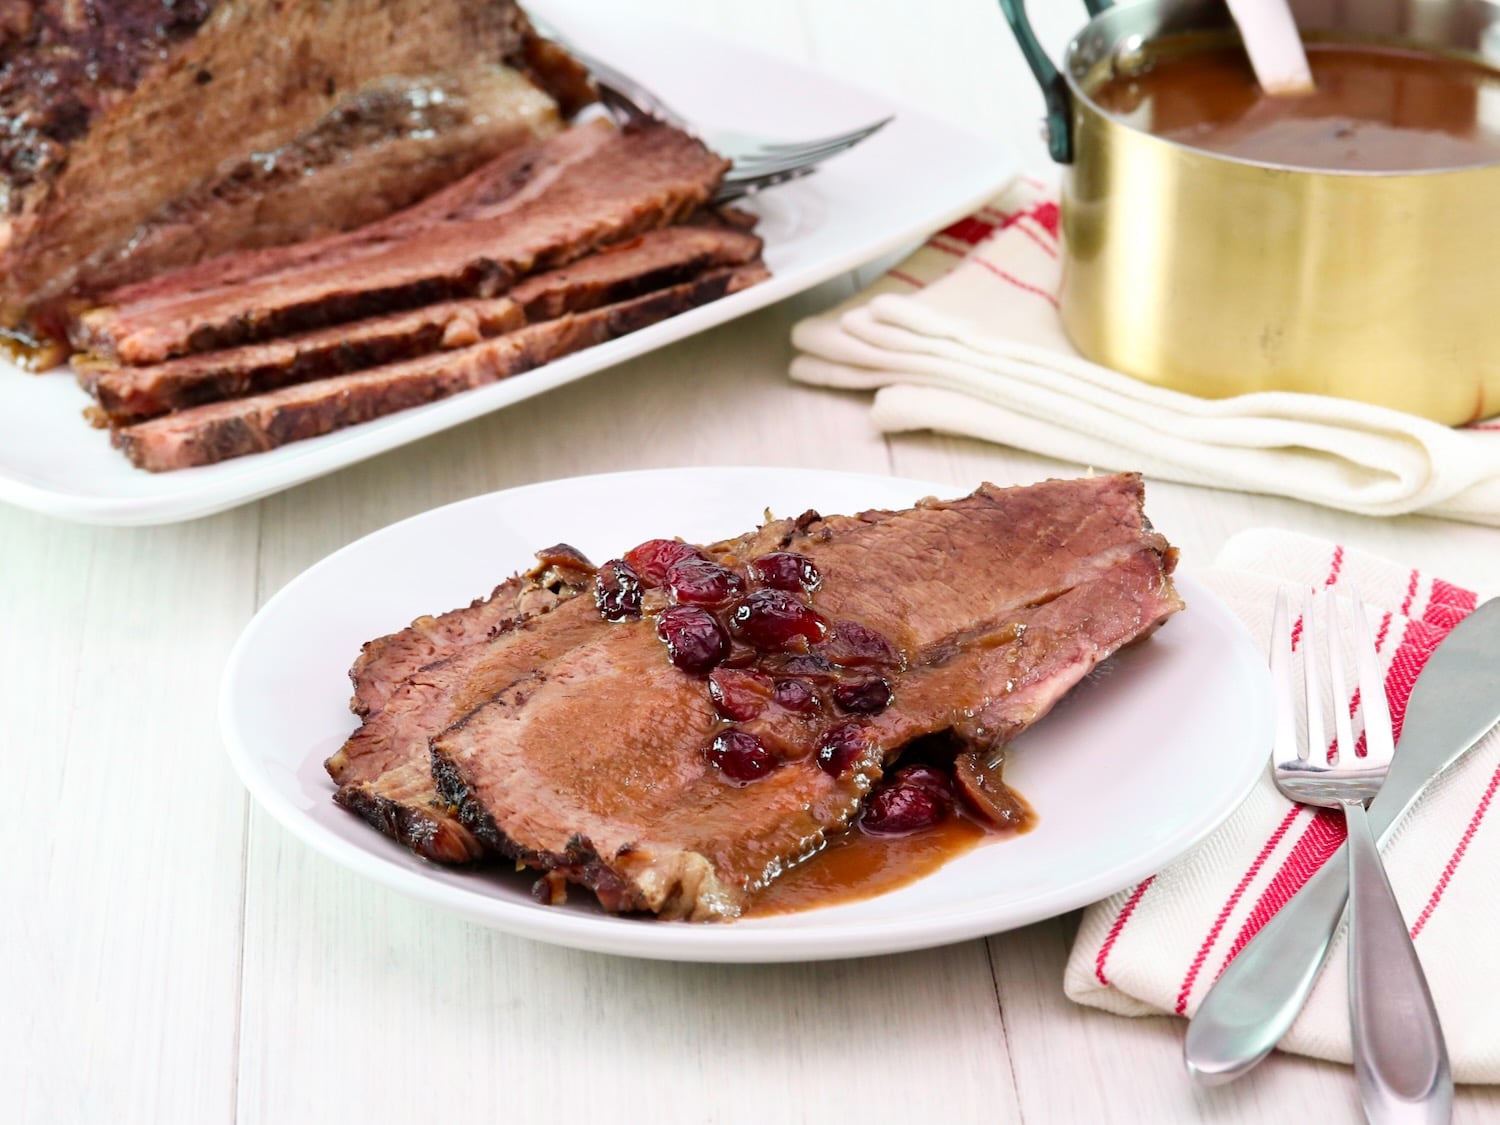 Horizontal shot - white wooden table set with dinner plate of Cranberry Chipotle brisket slices slathered in cranberry sauce and juices, with cloth napkin and utensils. Platter of sliced brisket and golden pan of sauce on a cloth napkin in the background.